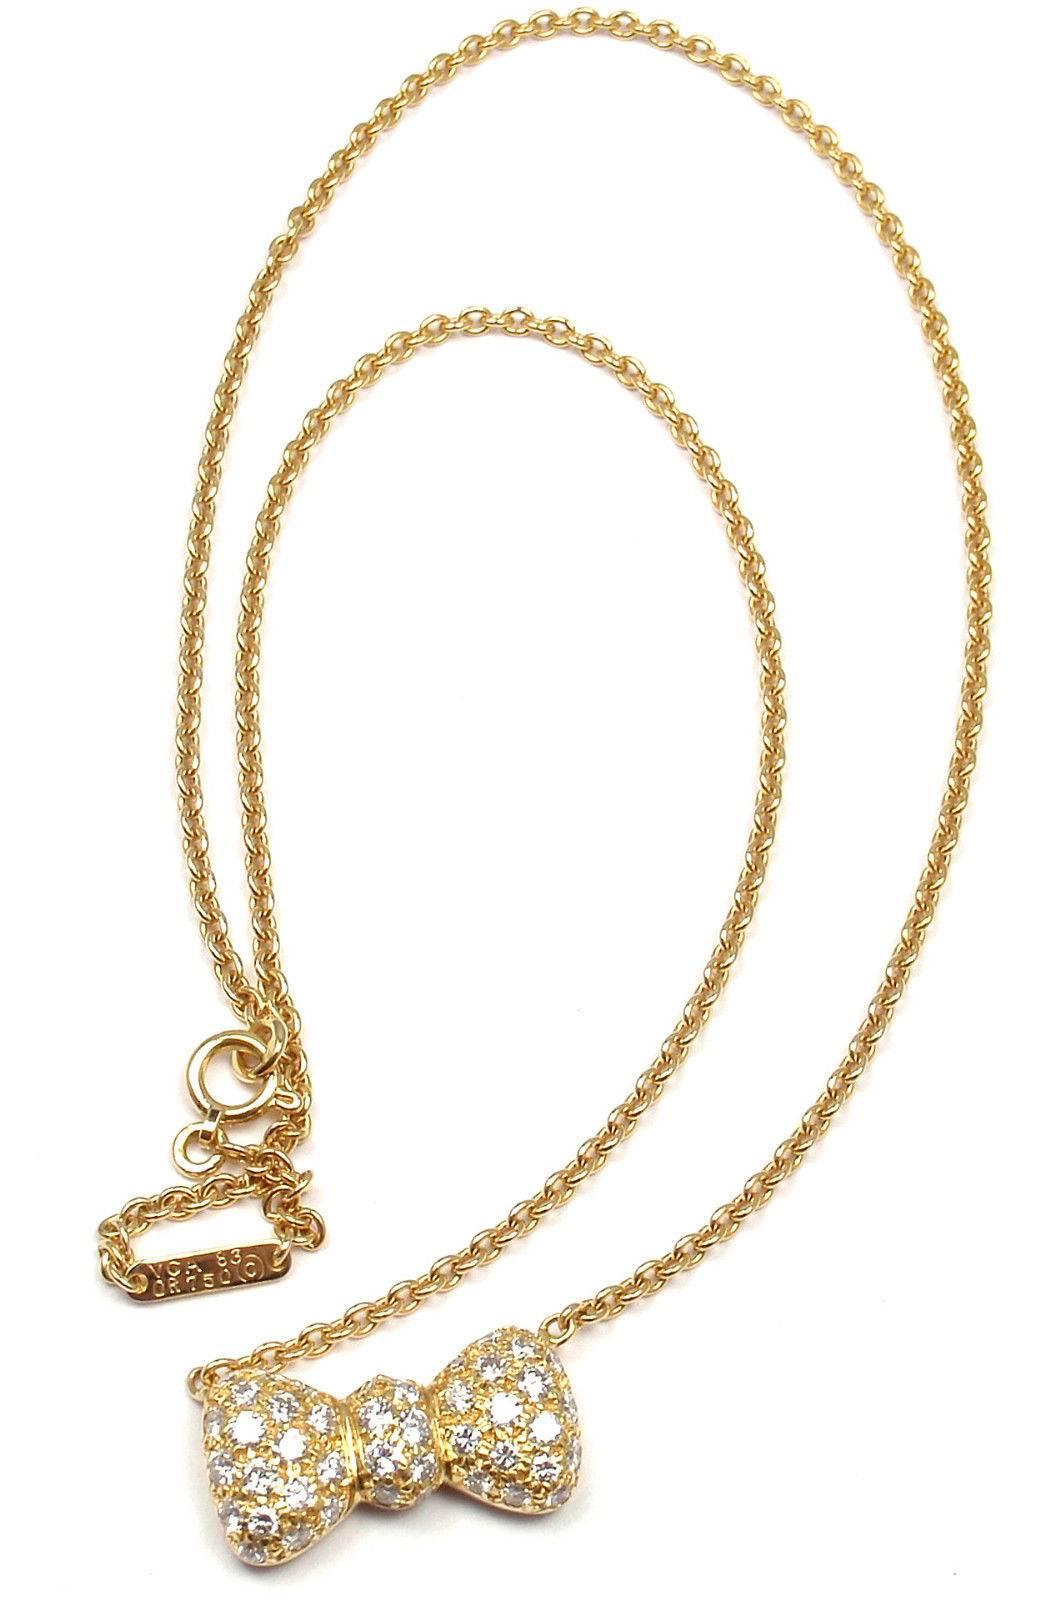 18k Yellow Gold Diamond Bow Pendant Necklace by Van Cleef & Arpels.
With 35 diamond VS1 clarity, E color total weight .89ct 
This necklace comes with VCA paper.
Details:
Length: 15.5